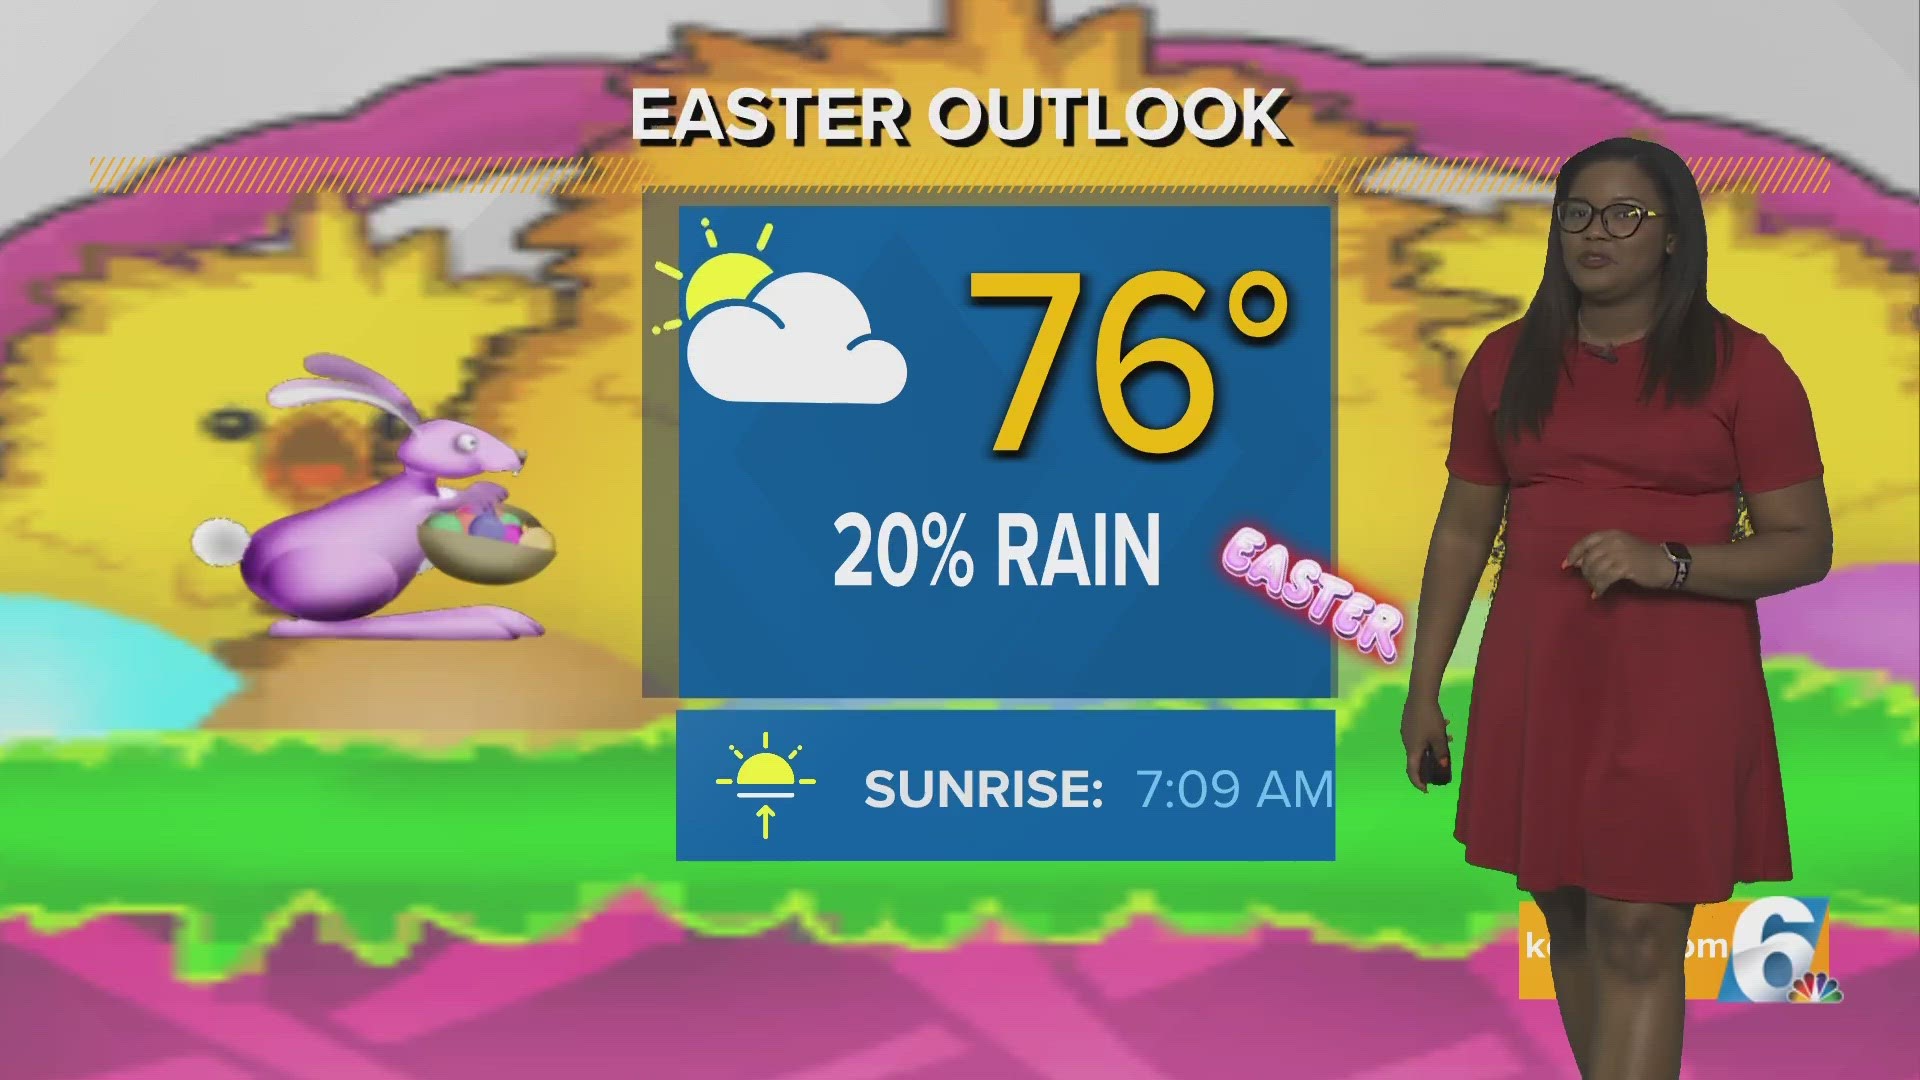 Daily rain chances for at least parts of Central Texas through Easter Sunday.